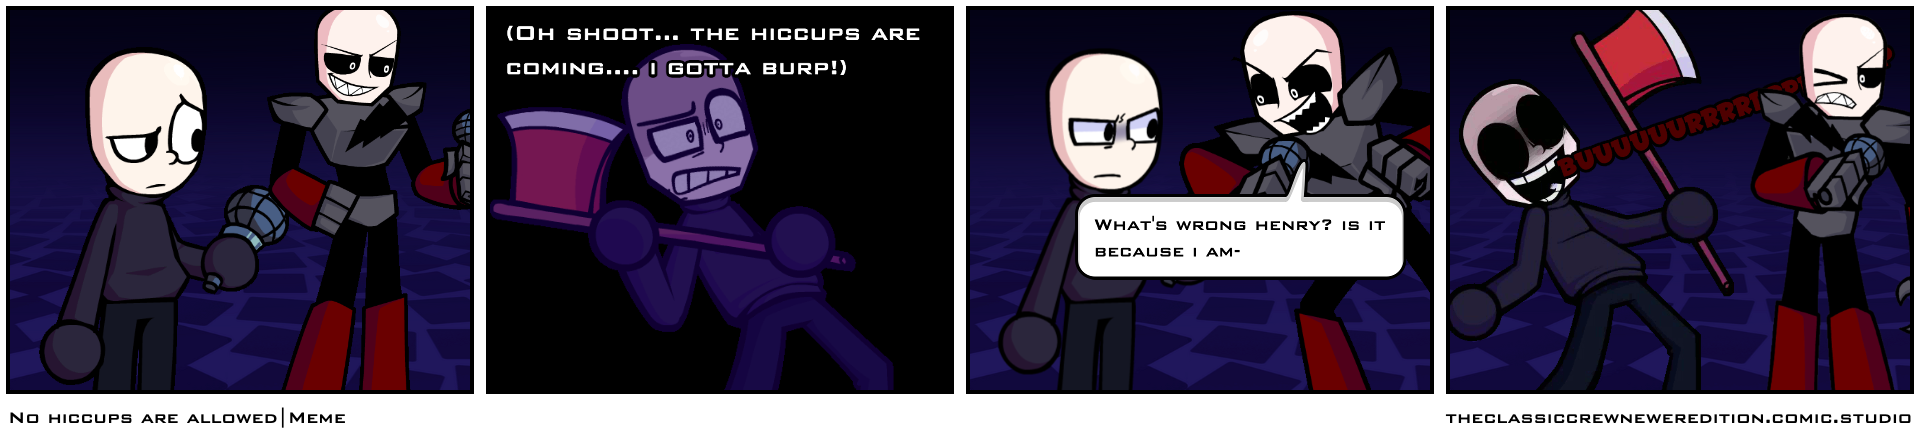 No hiccups are allowed|Meme